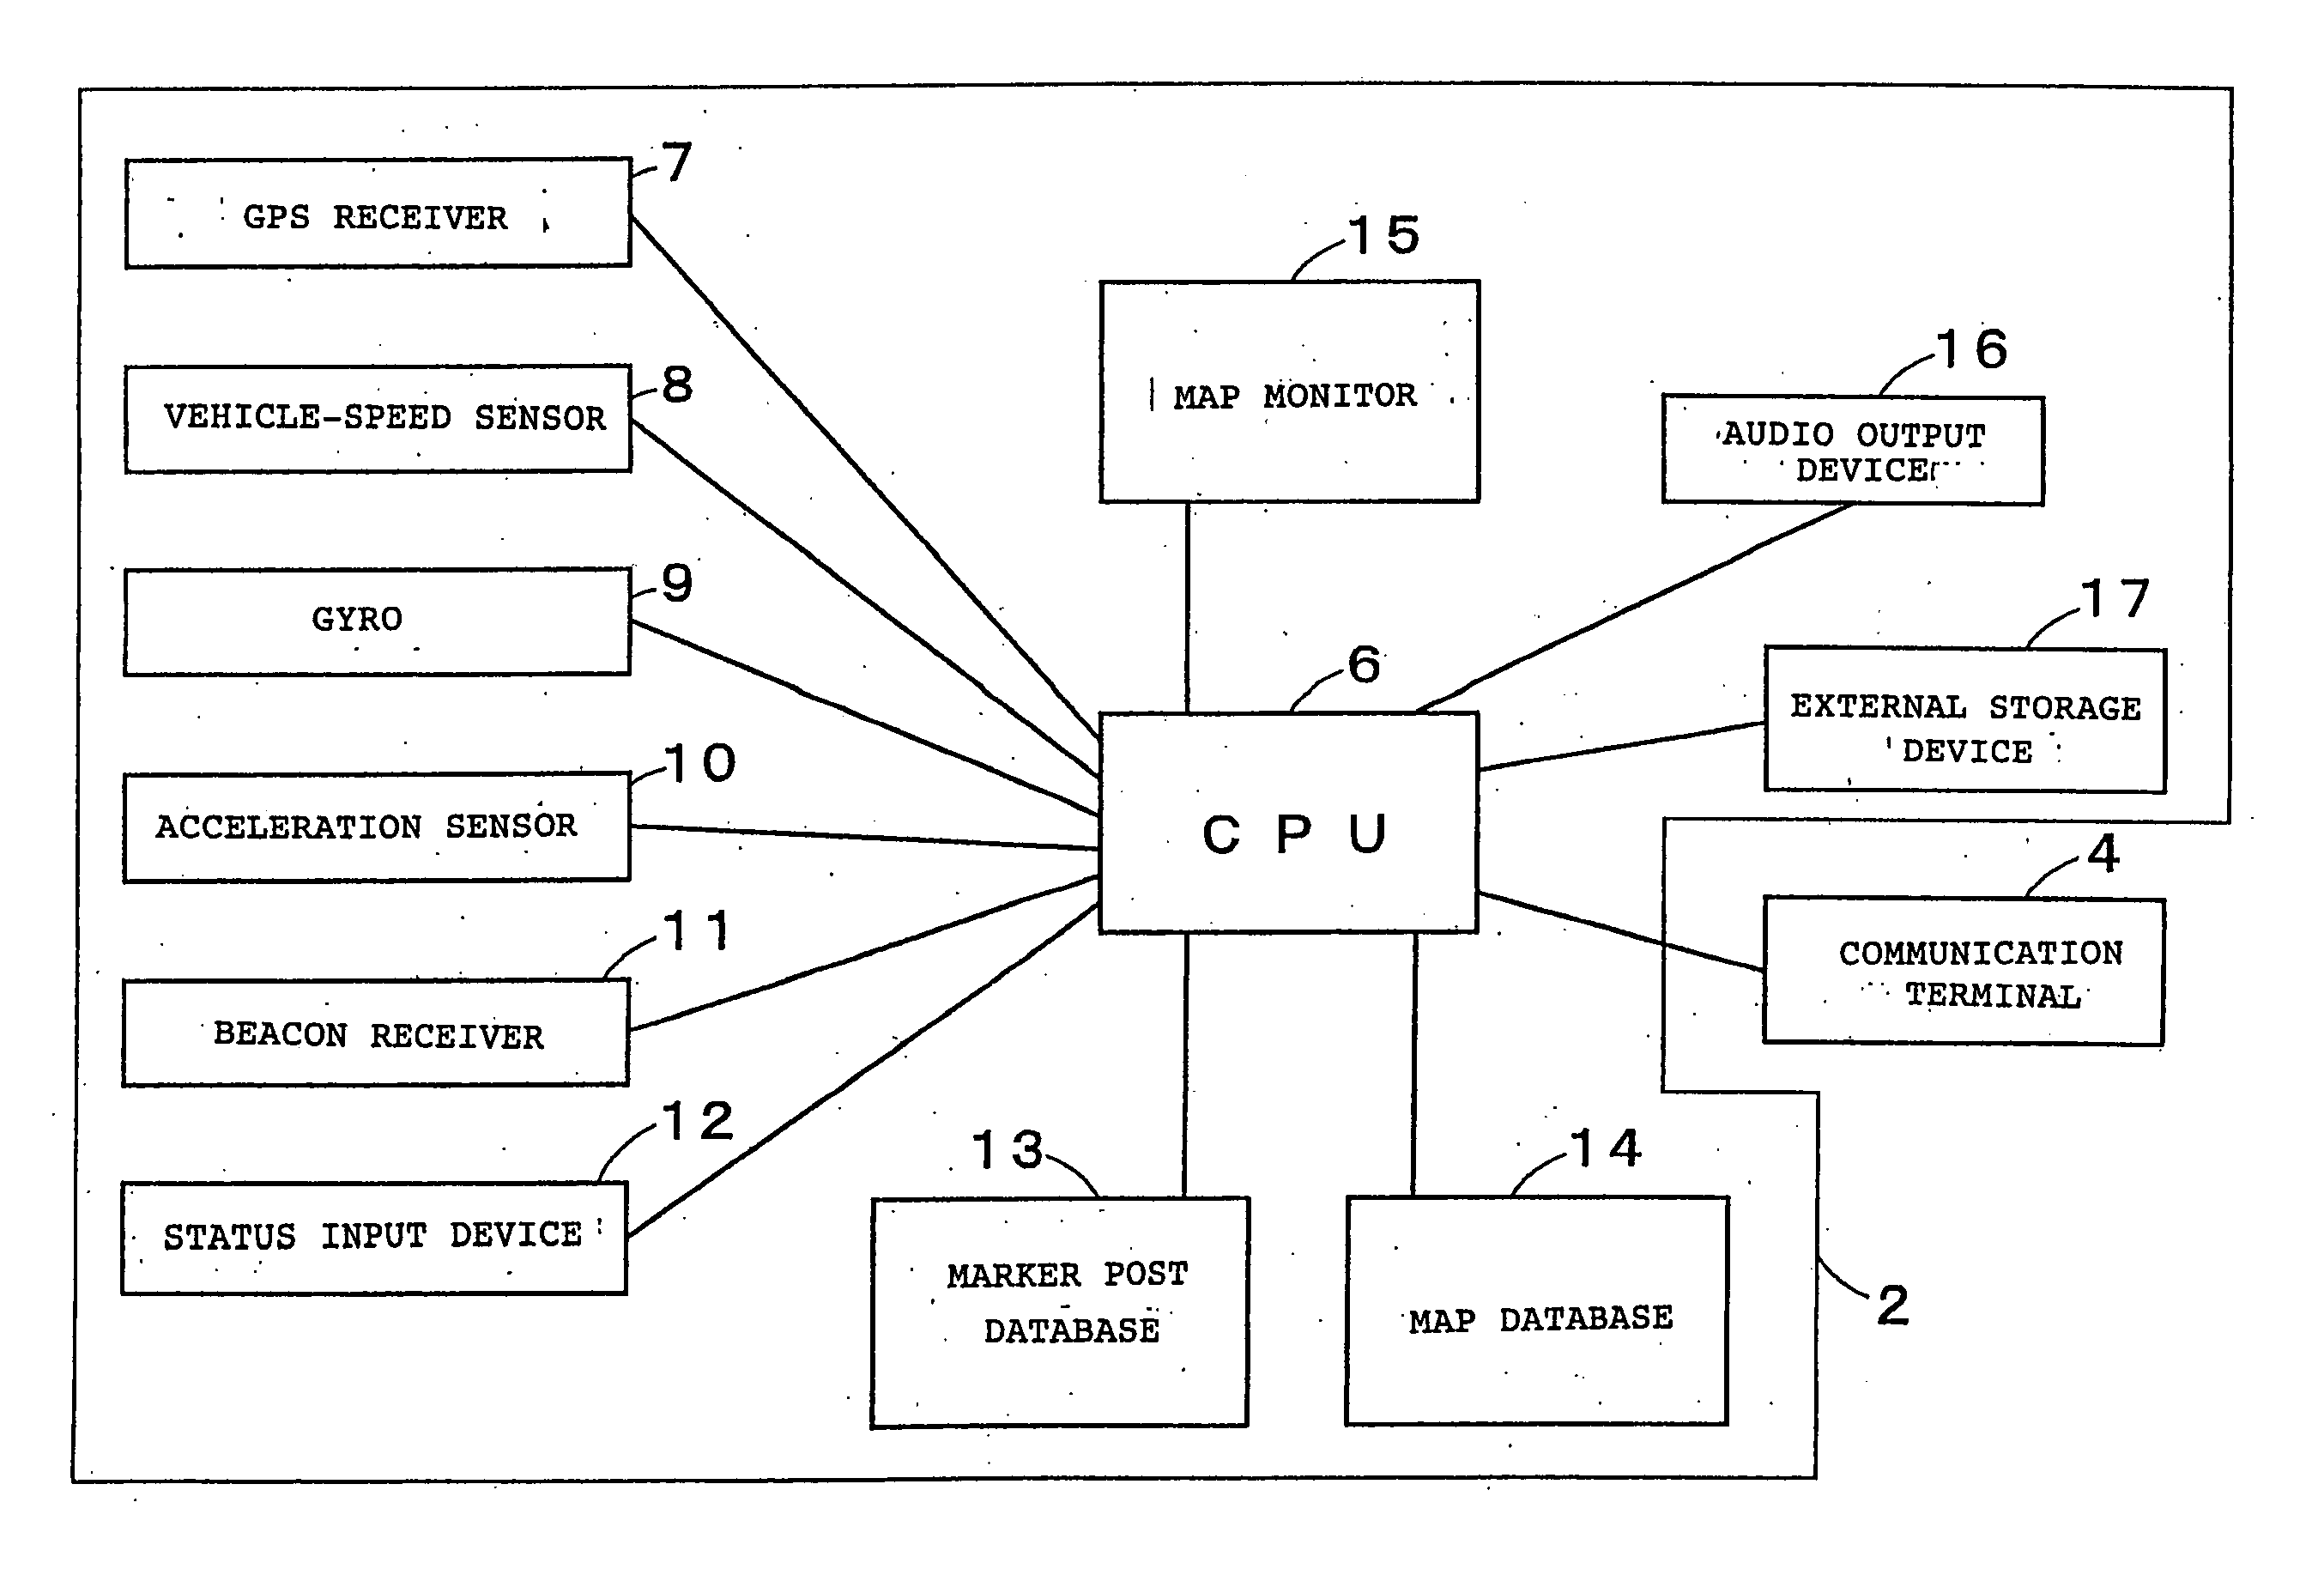 Vehicle-mounted information indication device and vehicle information communication system using the same